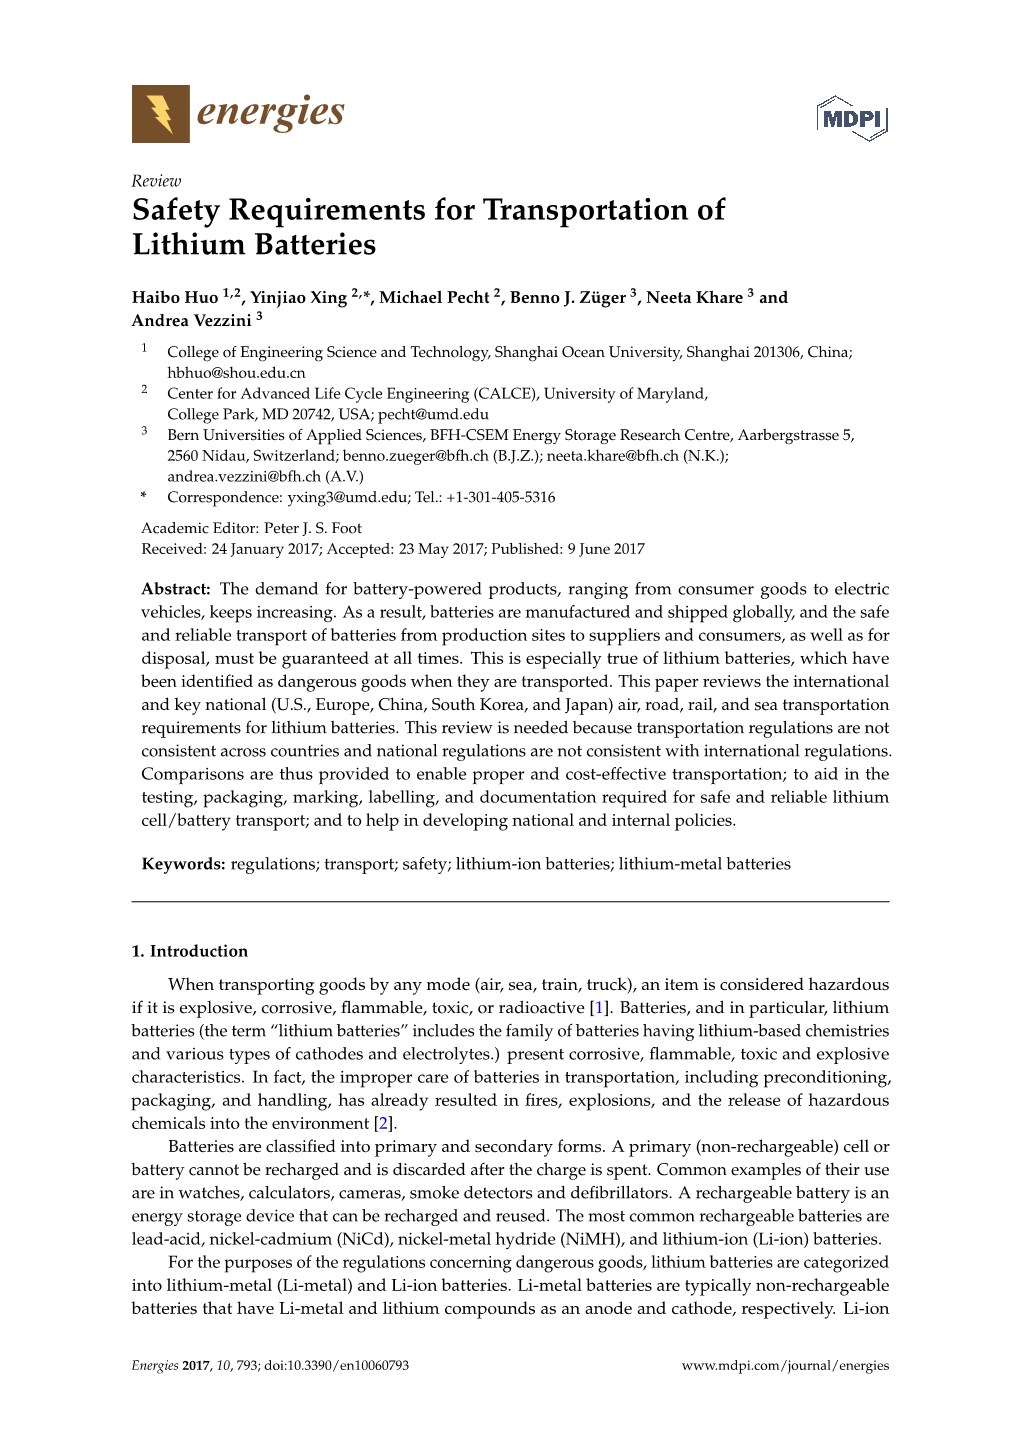 Safety Requirements for Transportation of Lithium Batteries